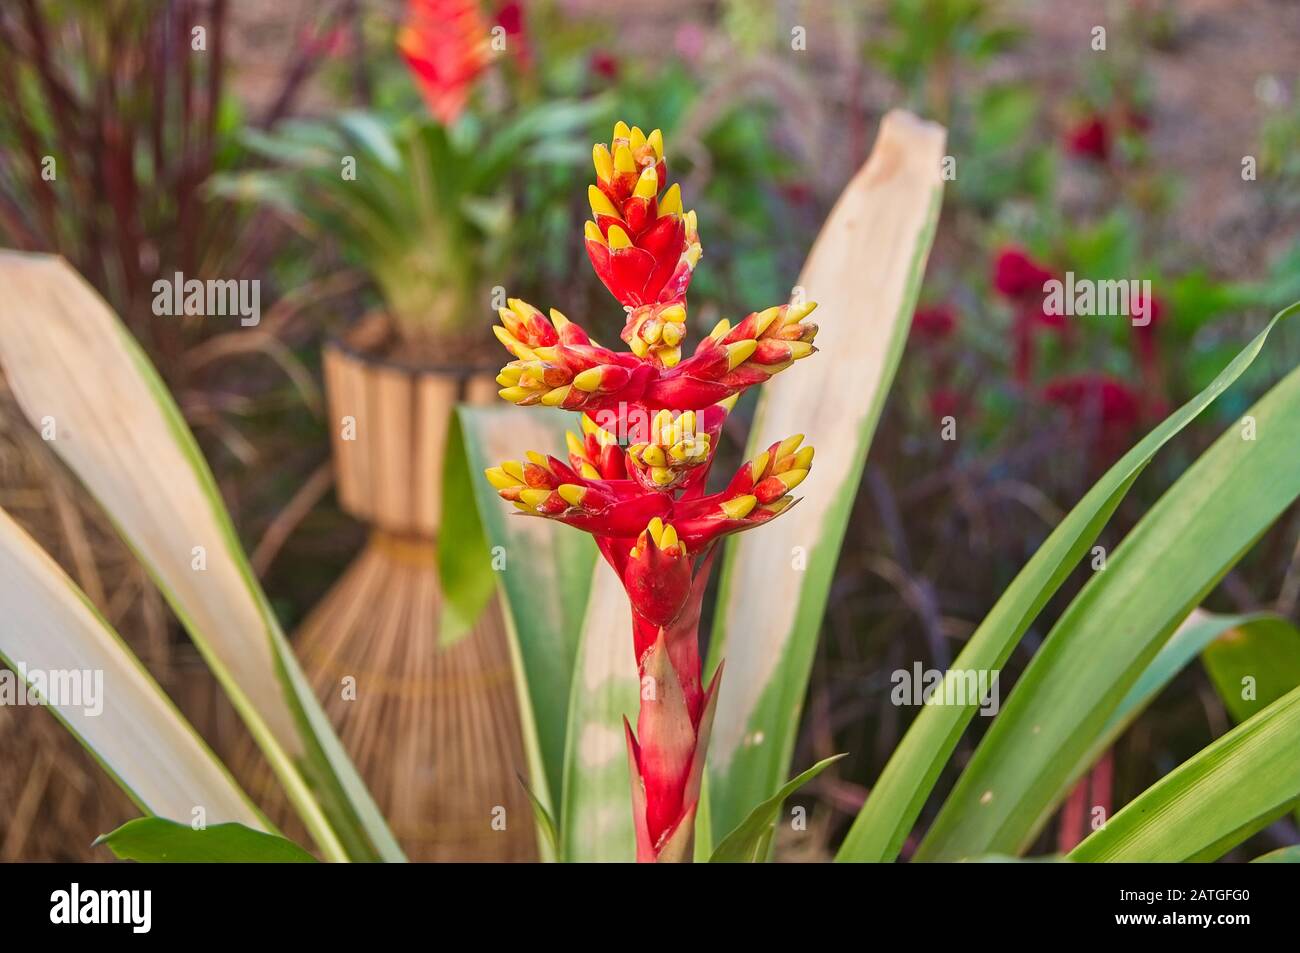 Red Yellow Bromeliad Flower Blooming in The Garden. Stock Photo